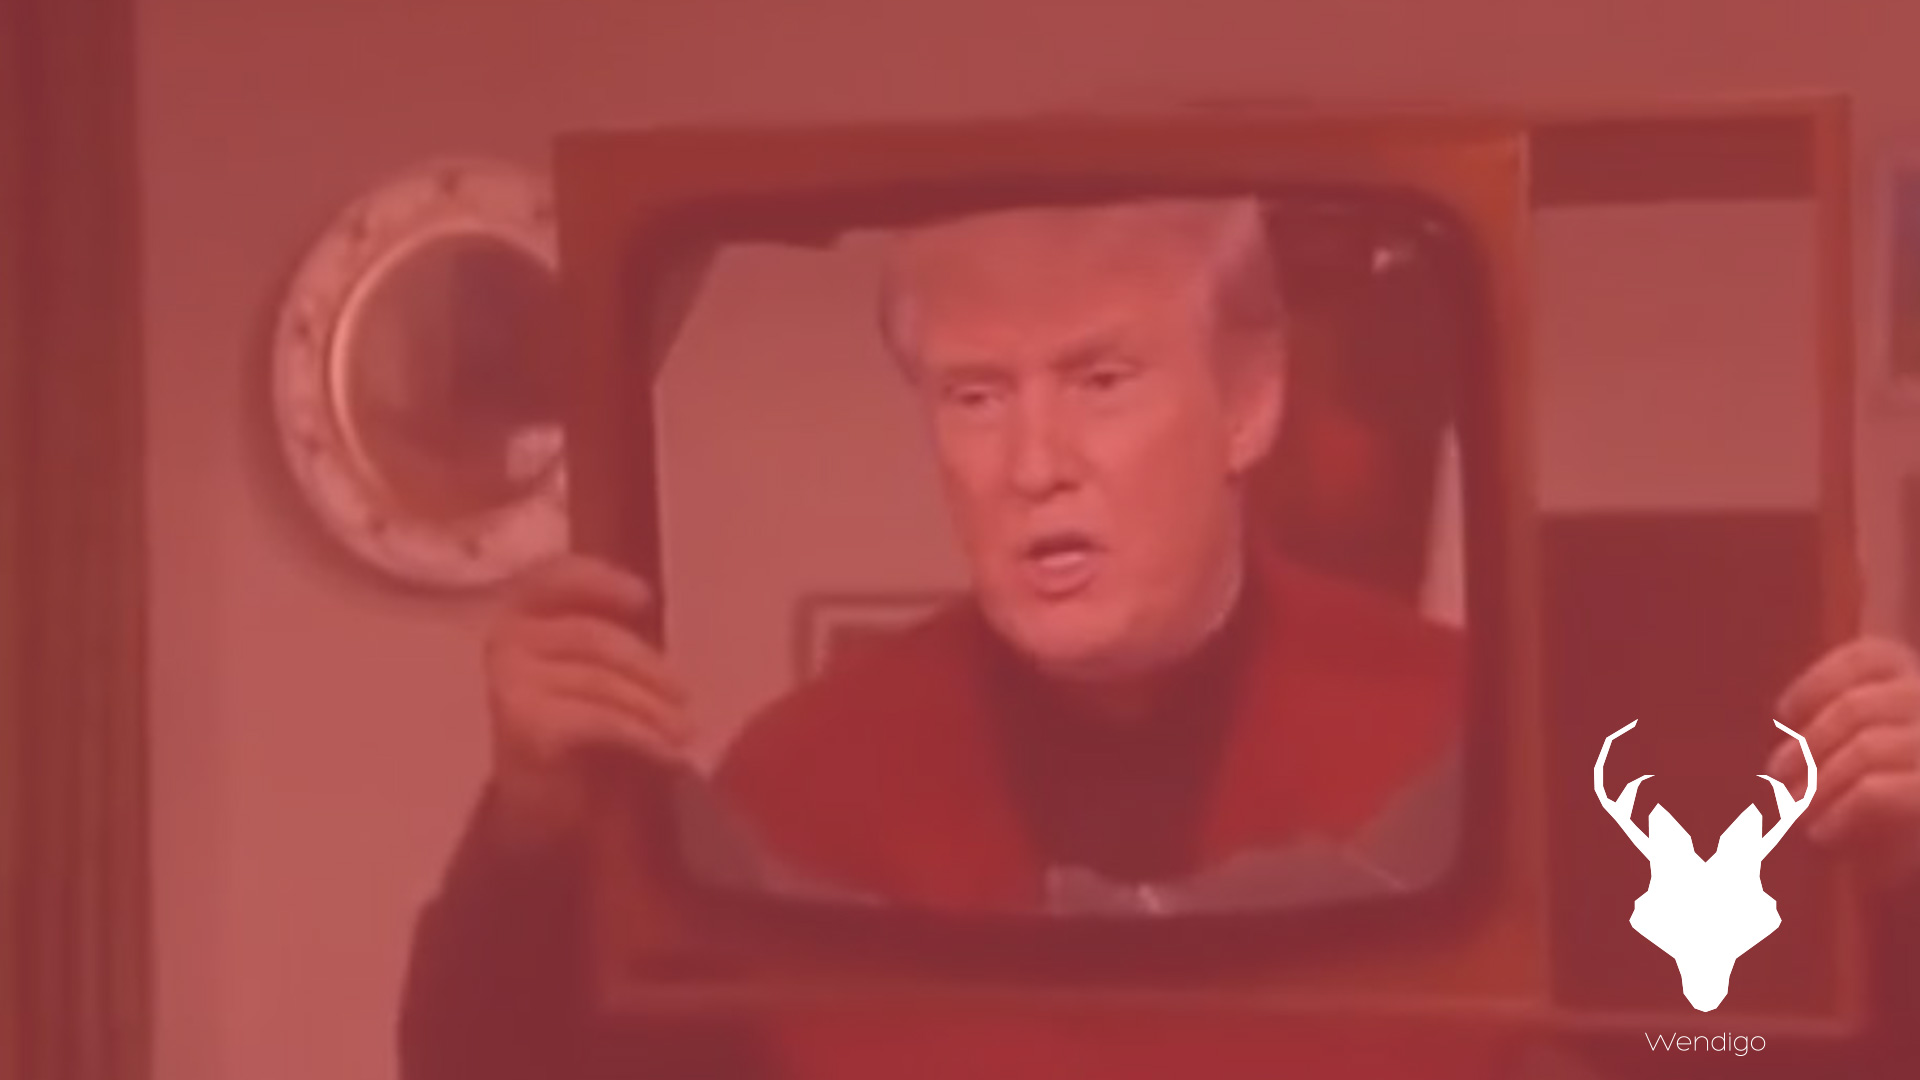 Father Ted meets Donald Trump and goes Viral